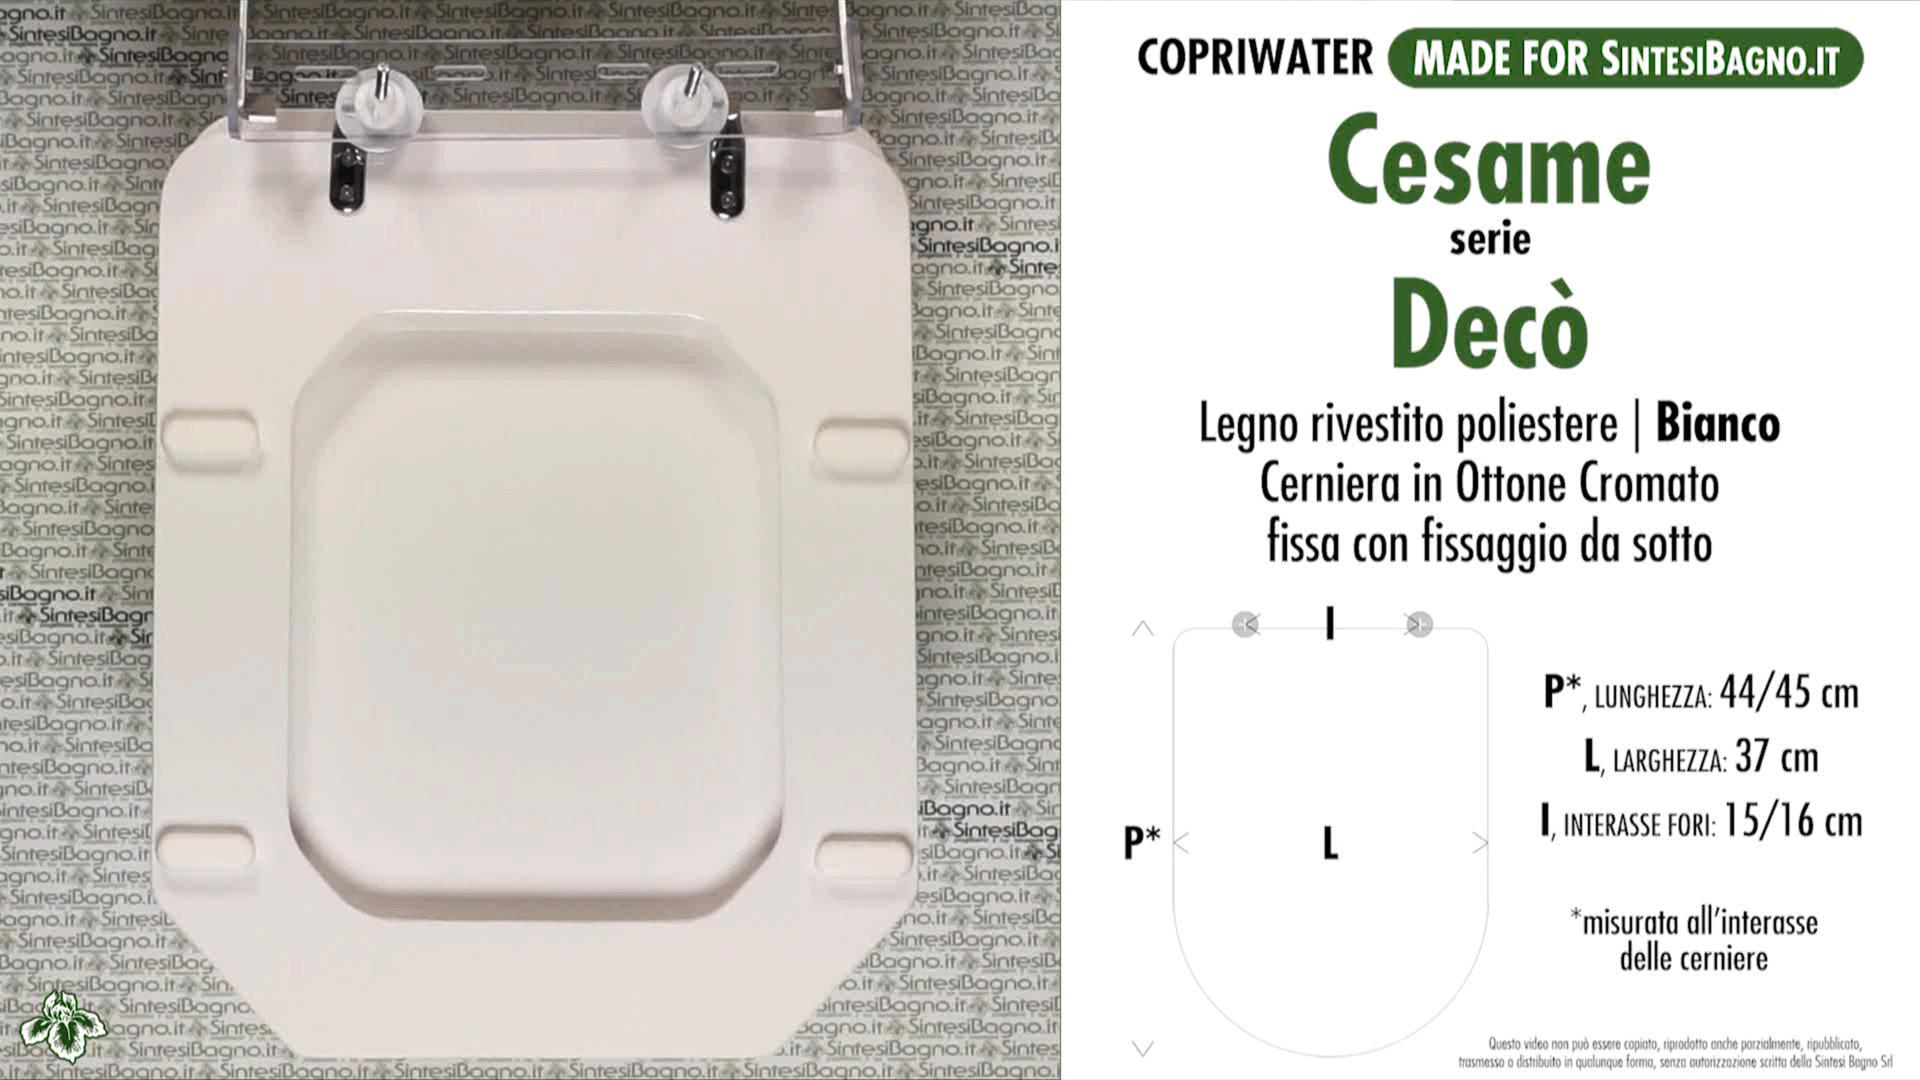 Details About Toilet Seat Wc Seat Sintesibagno Made For Cesame Wc Deco Series Mam13001bi